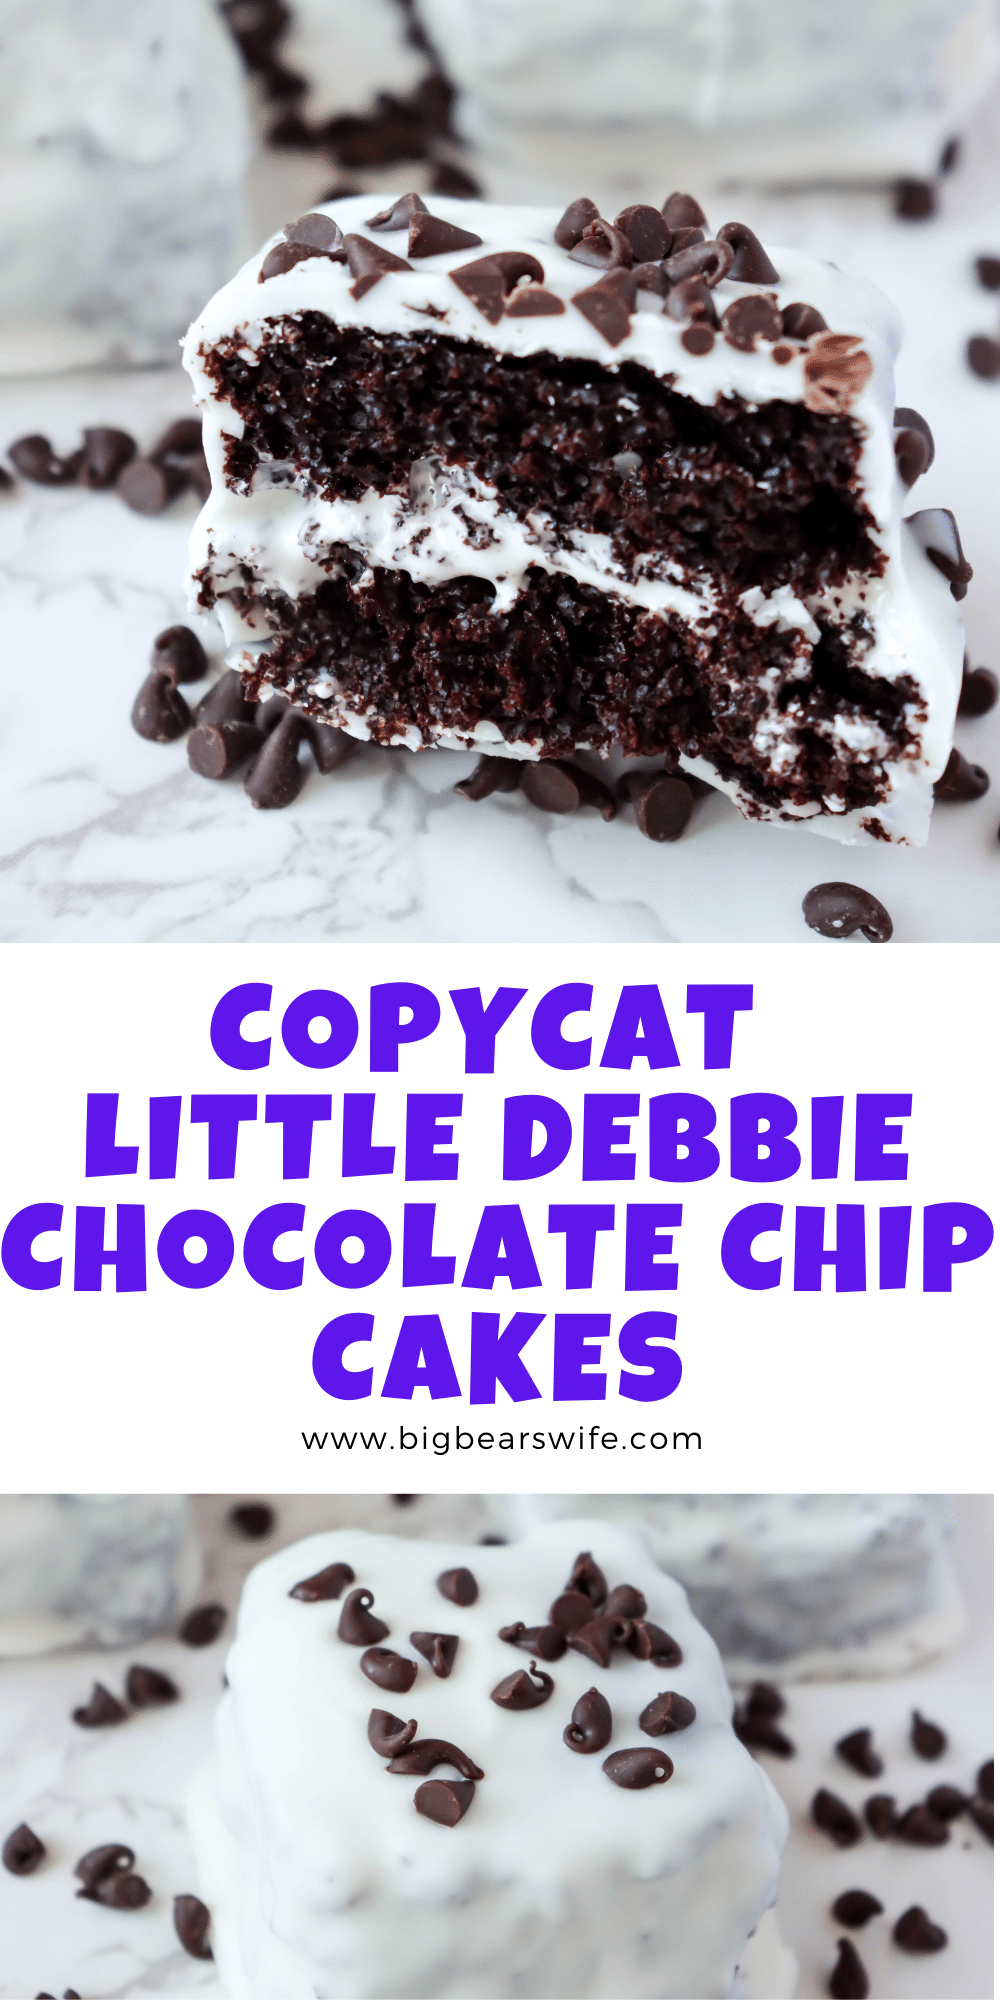 This recipe for CopyCat Little Debbie Chocolate Chip Cakes gives a homemade twist to these classic little cake treats! Layers of homemade chocolate cake with marshmallow cream centers, dipped in white chocolate and topped with mini chocolate chips.  via @bigbearswife